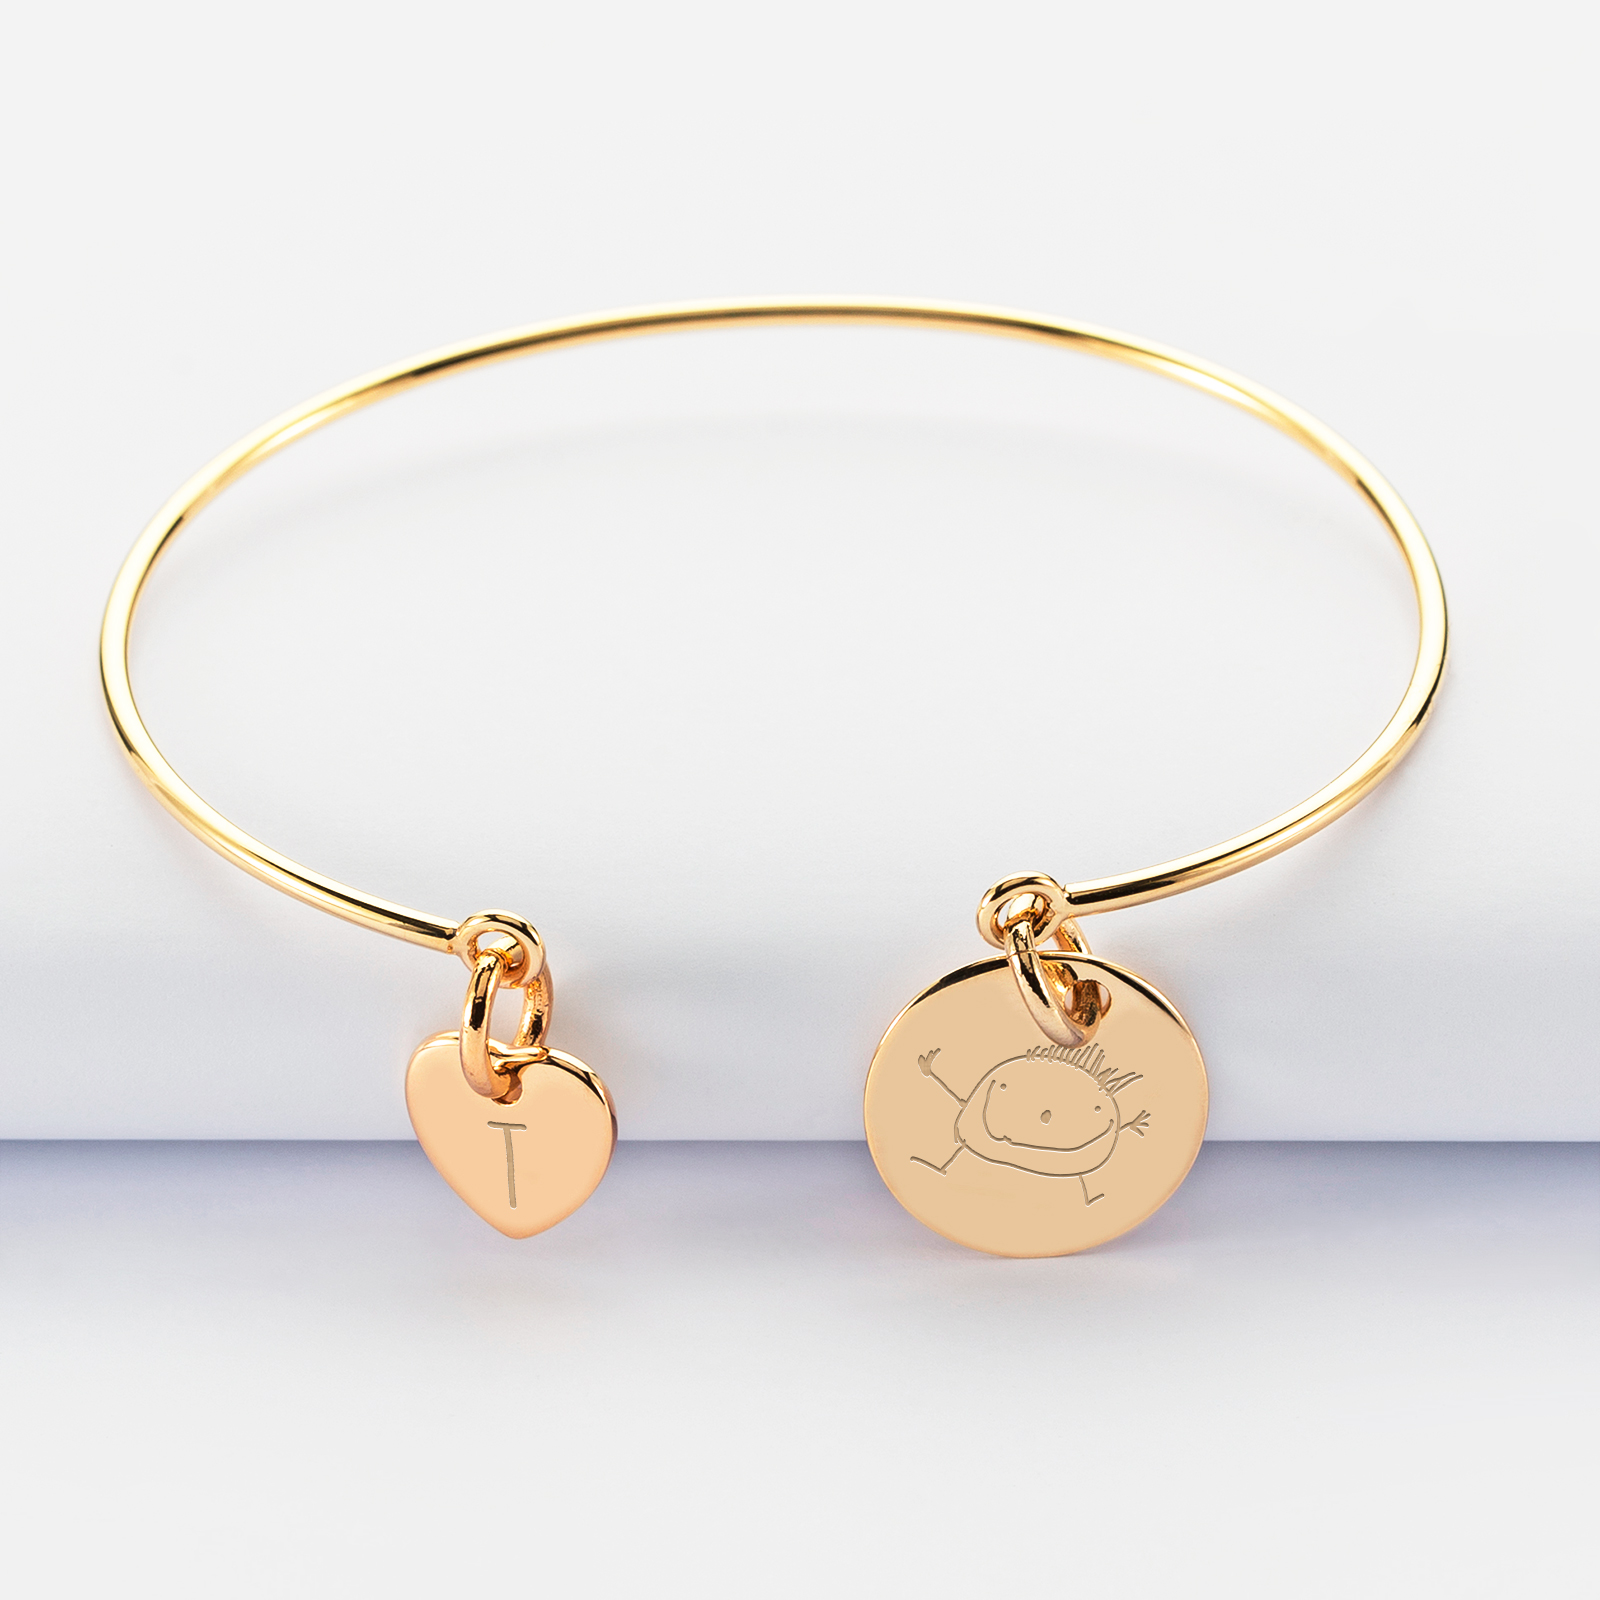 Personalised gold plated engraved 15mm bangle and heart 10mm charm - sketch